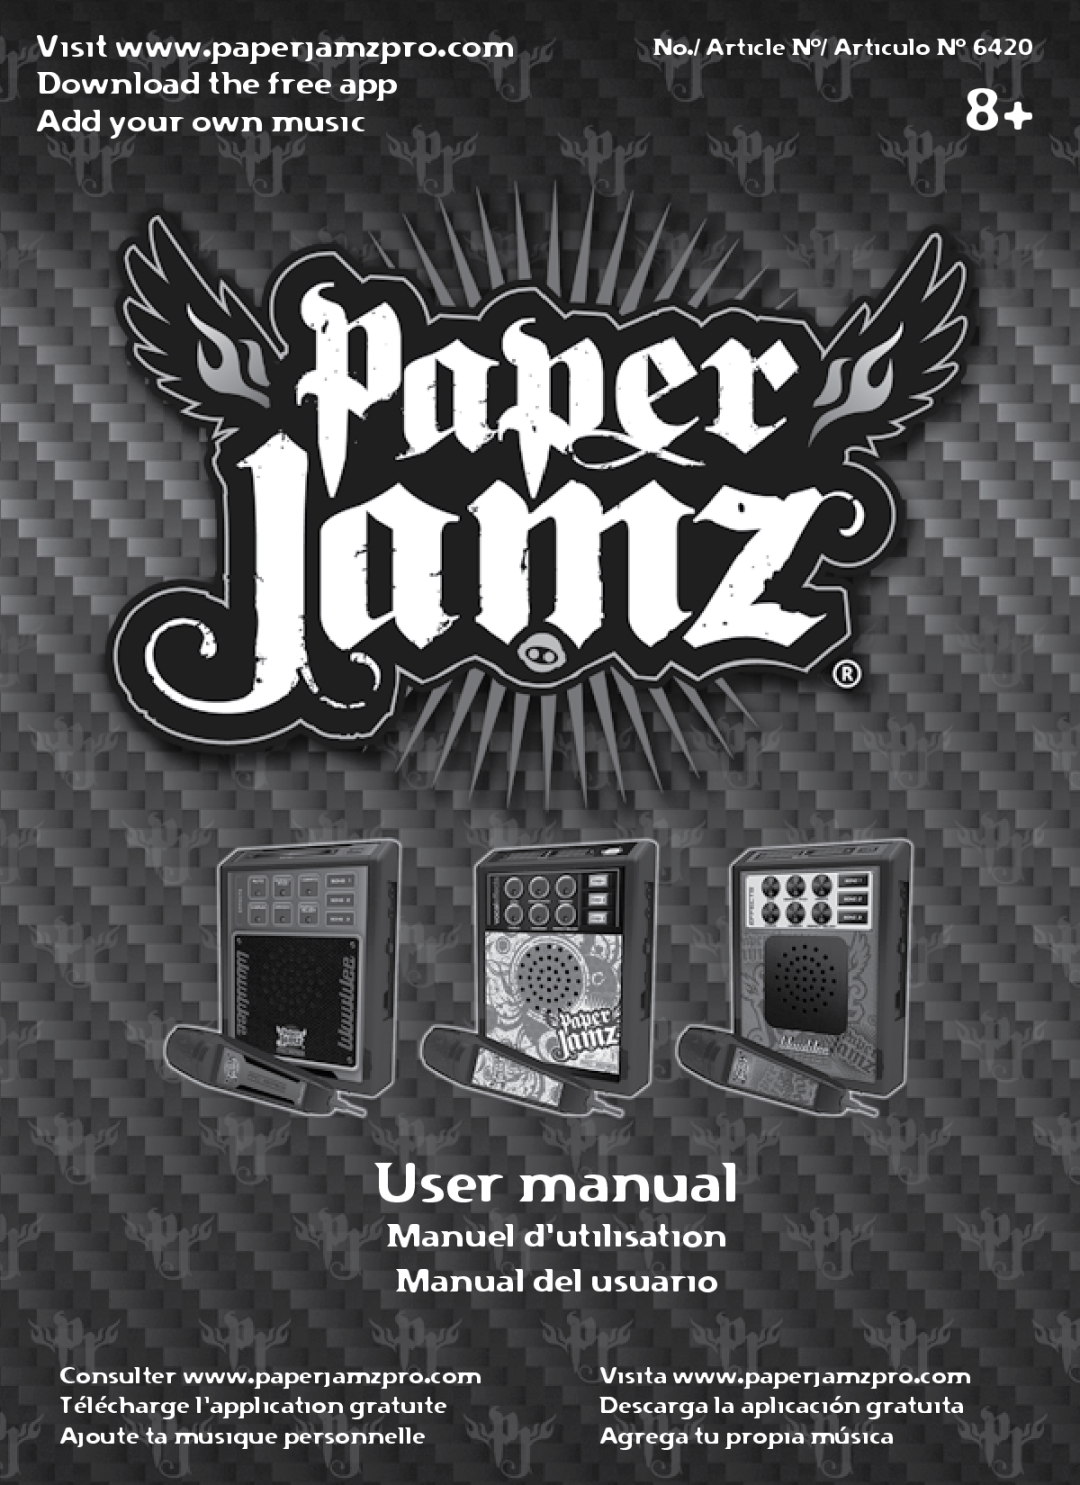 Wow Wee 62473 user manual Download the free app, Add your own music, Manuel d’utilisation Manual del usuario 